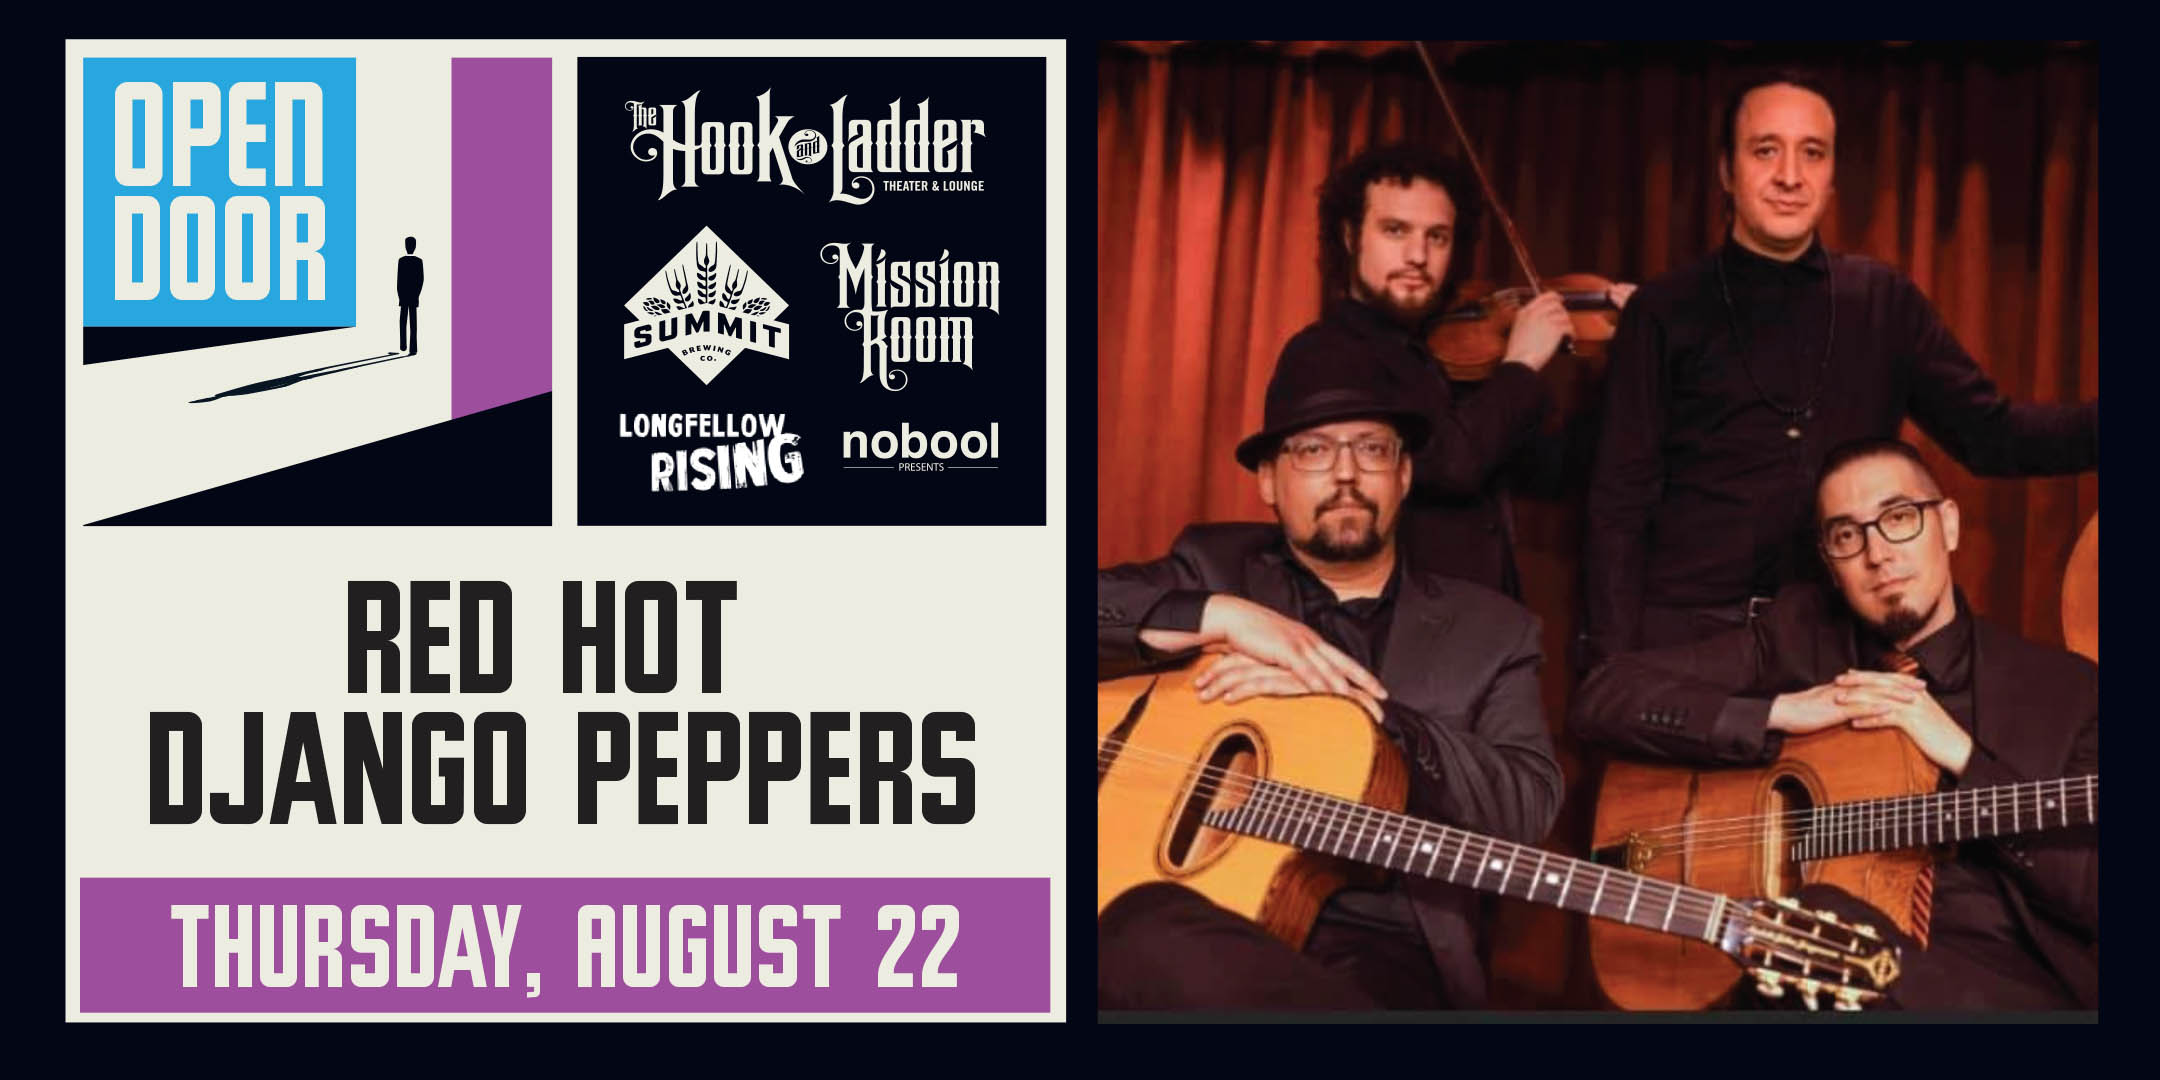 Summit Brewing & Longfellow Rising presents Open Door Series: Red Hot Django Peppers Thursday, August 22 at The Hook and Ladder's Mission Room Doors 5pm :: Music 7-10pm :: 21+ FREE $5.01 Online Advance Donation (Includes a Summit Beer & 21+ Wristband*) $10 Donation at The Door (Includes a Summit Beer & 21+ Wristband*)